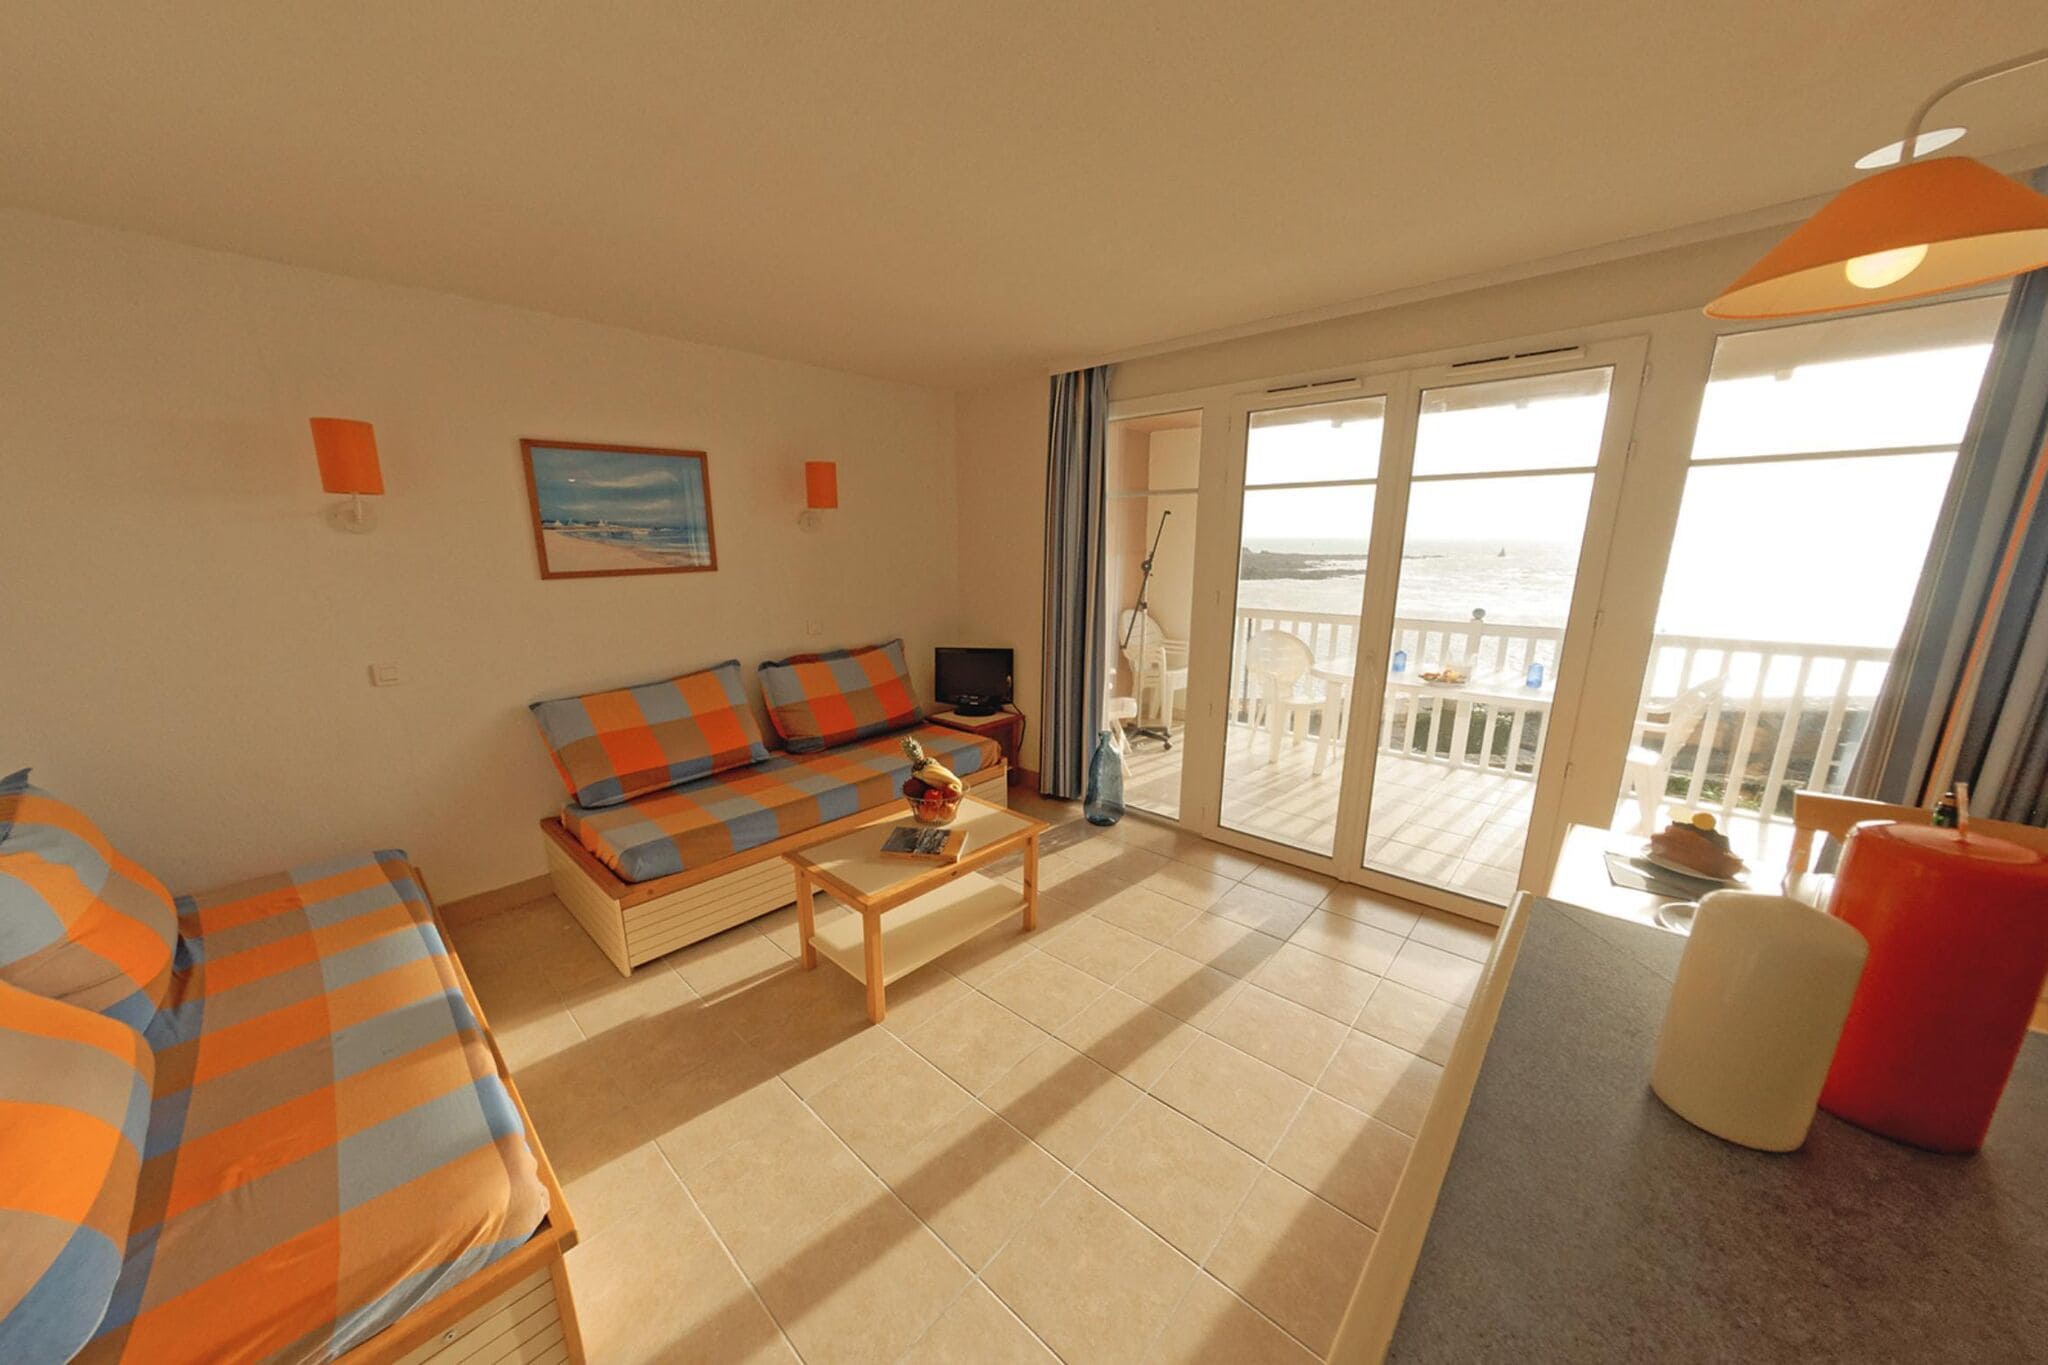 Apartment near the beautiful beach of Trescadec with sea view